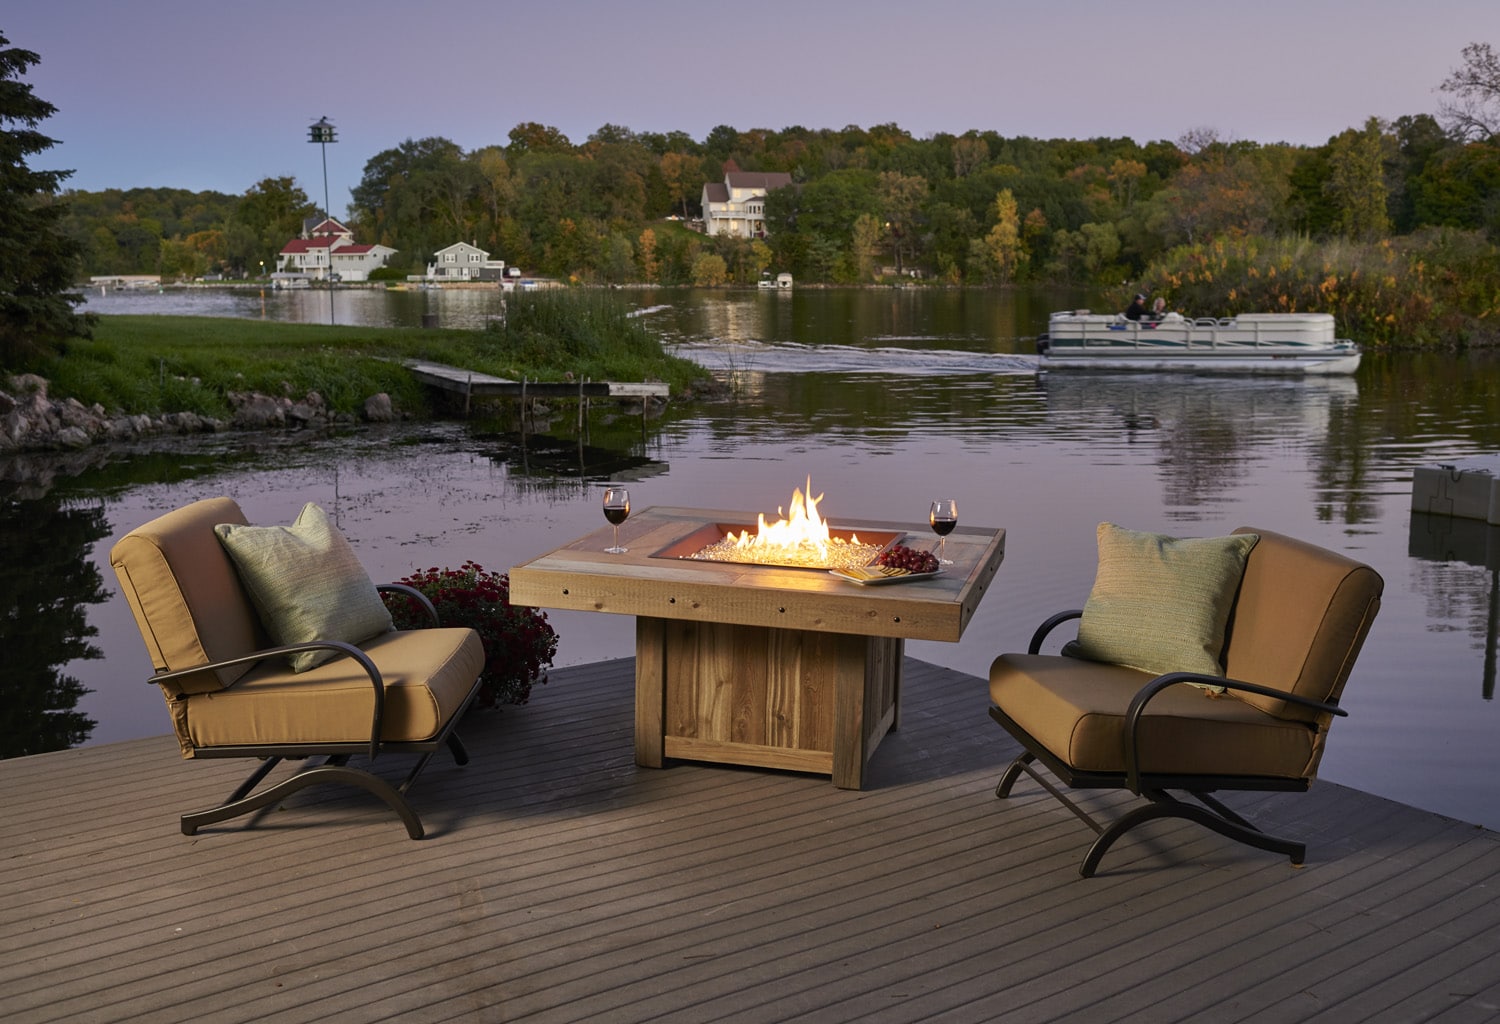 Why Choose a Made in the USA Fire Pit?